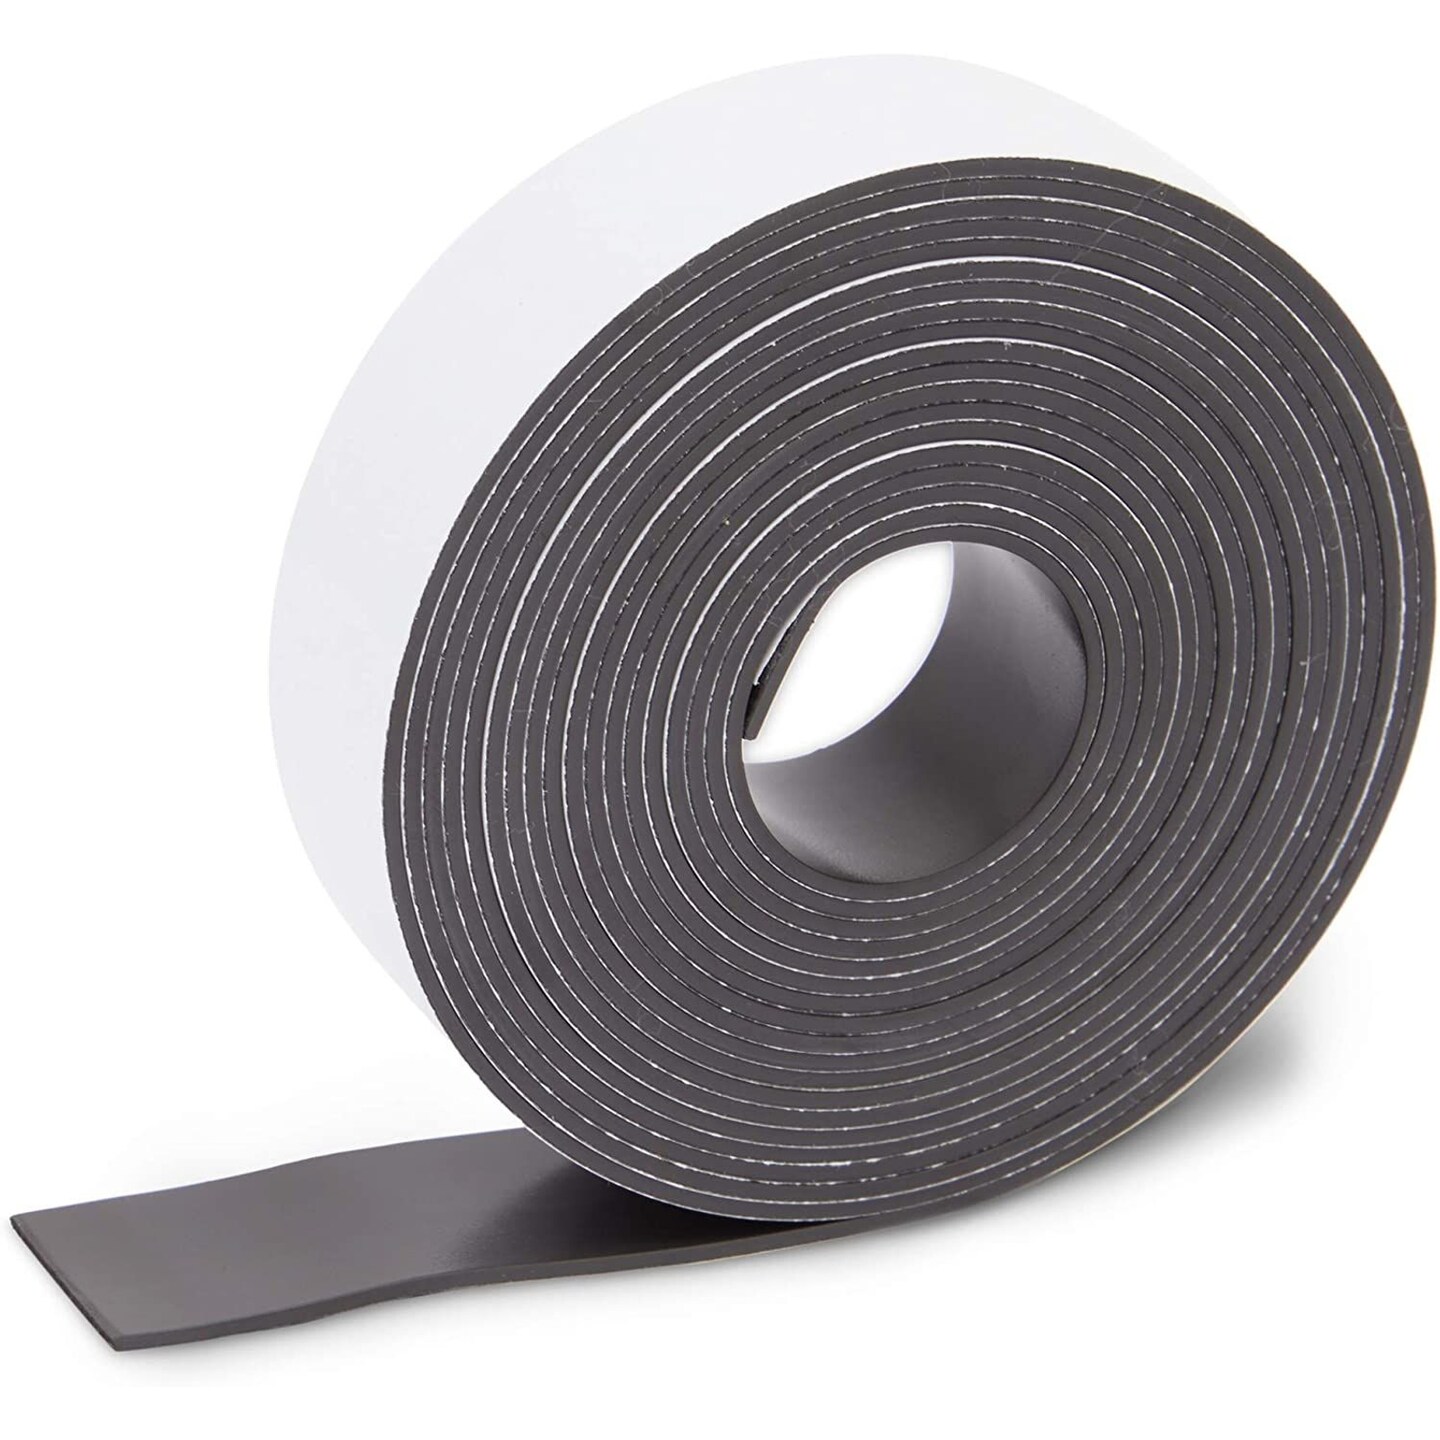 1 Inch Wide x 100 Feet Long Sticky Magnetic Strip for DIY, Arts